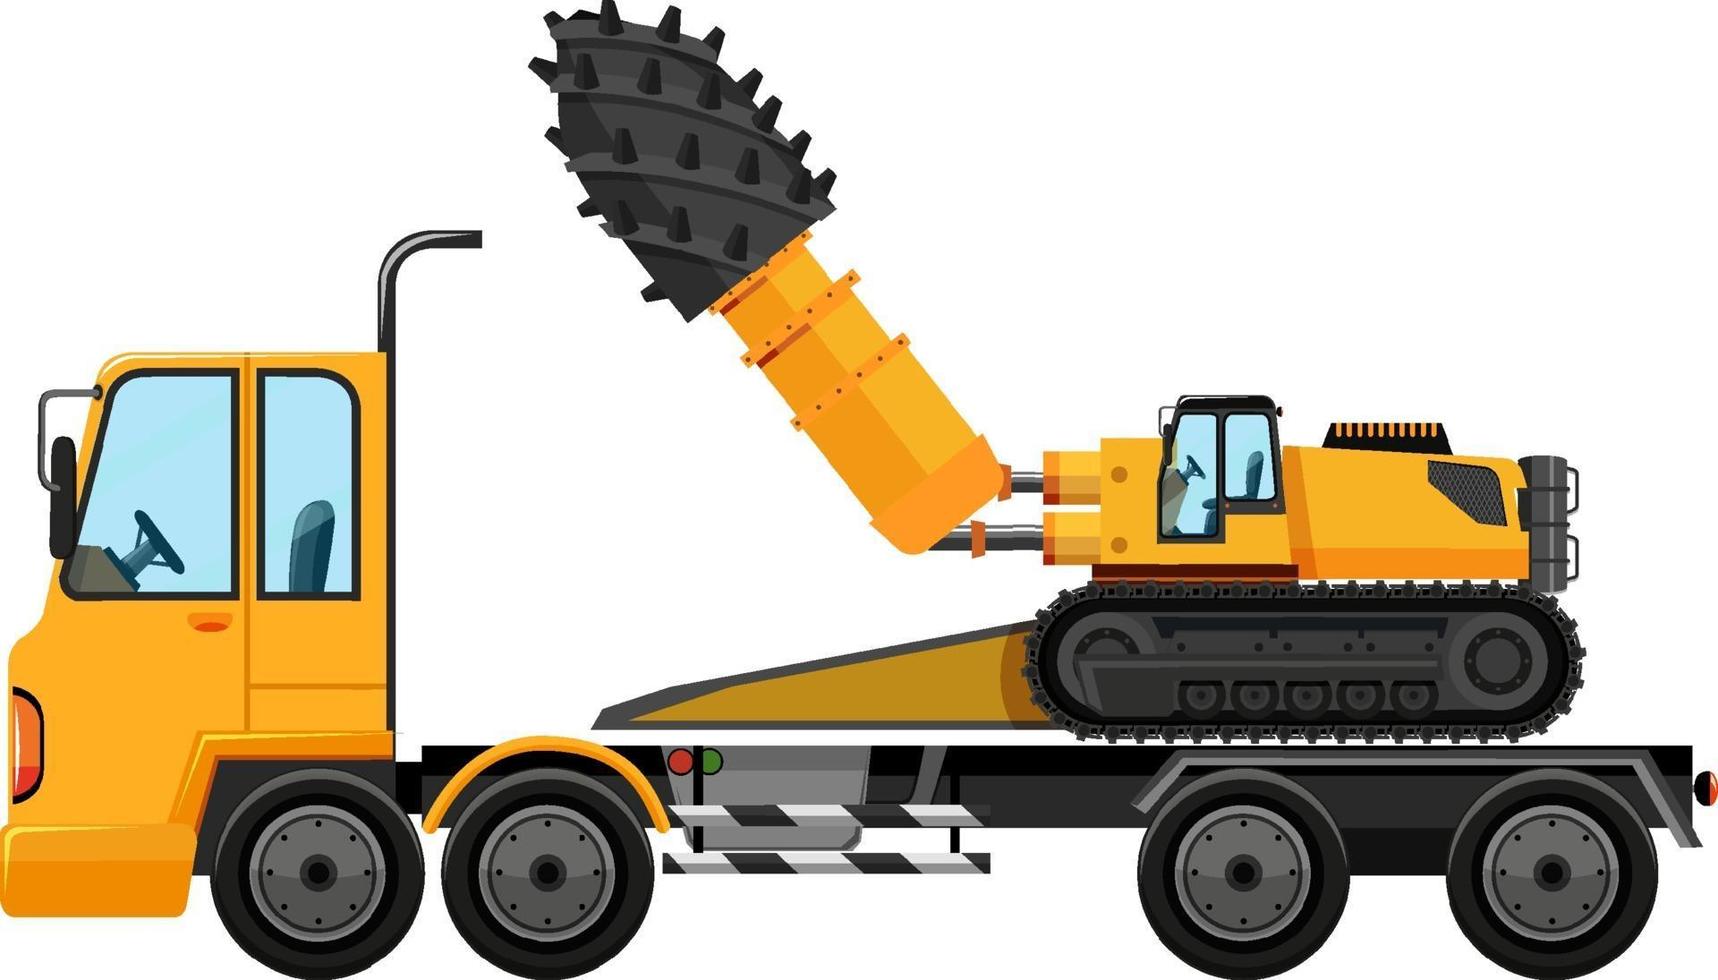 Tow truck carrying construction car isolated on white background vector